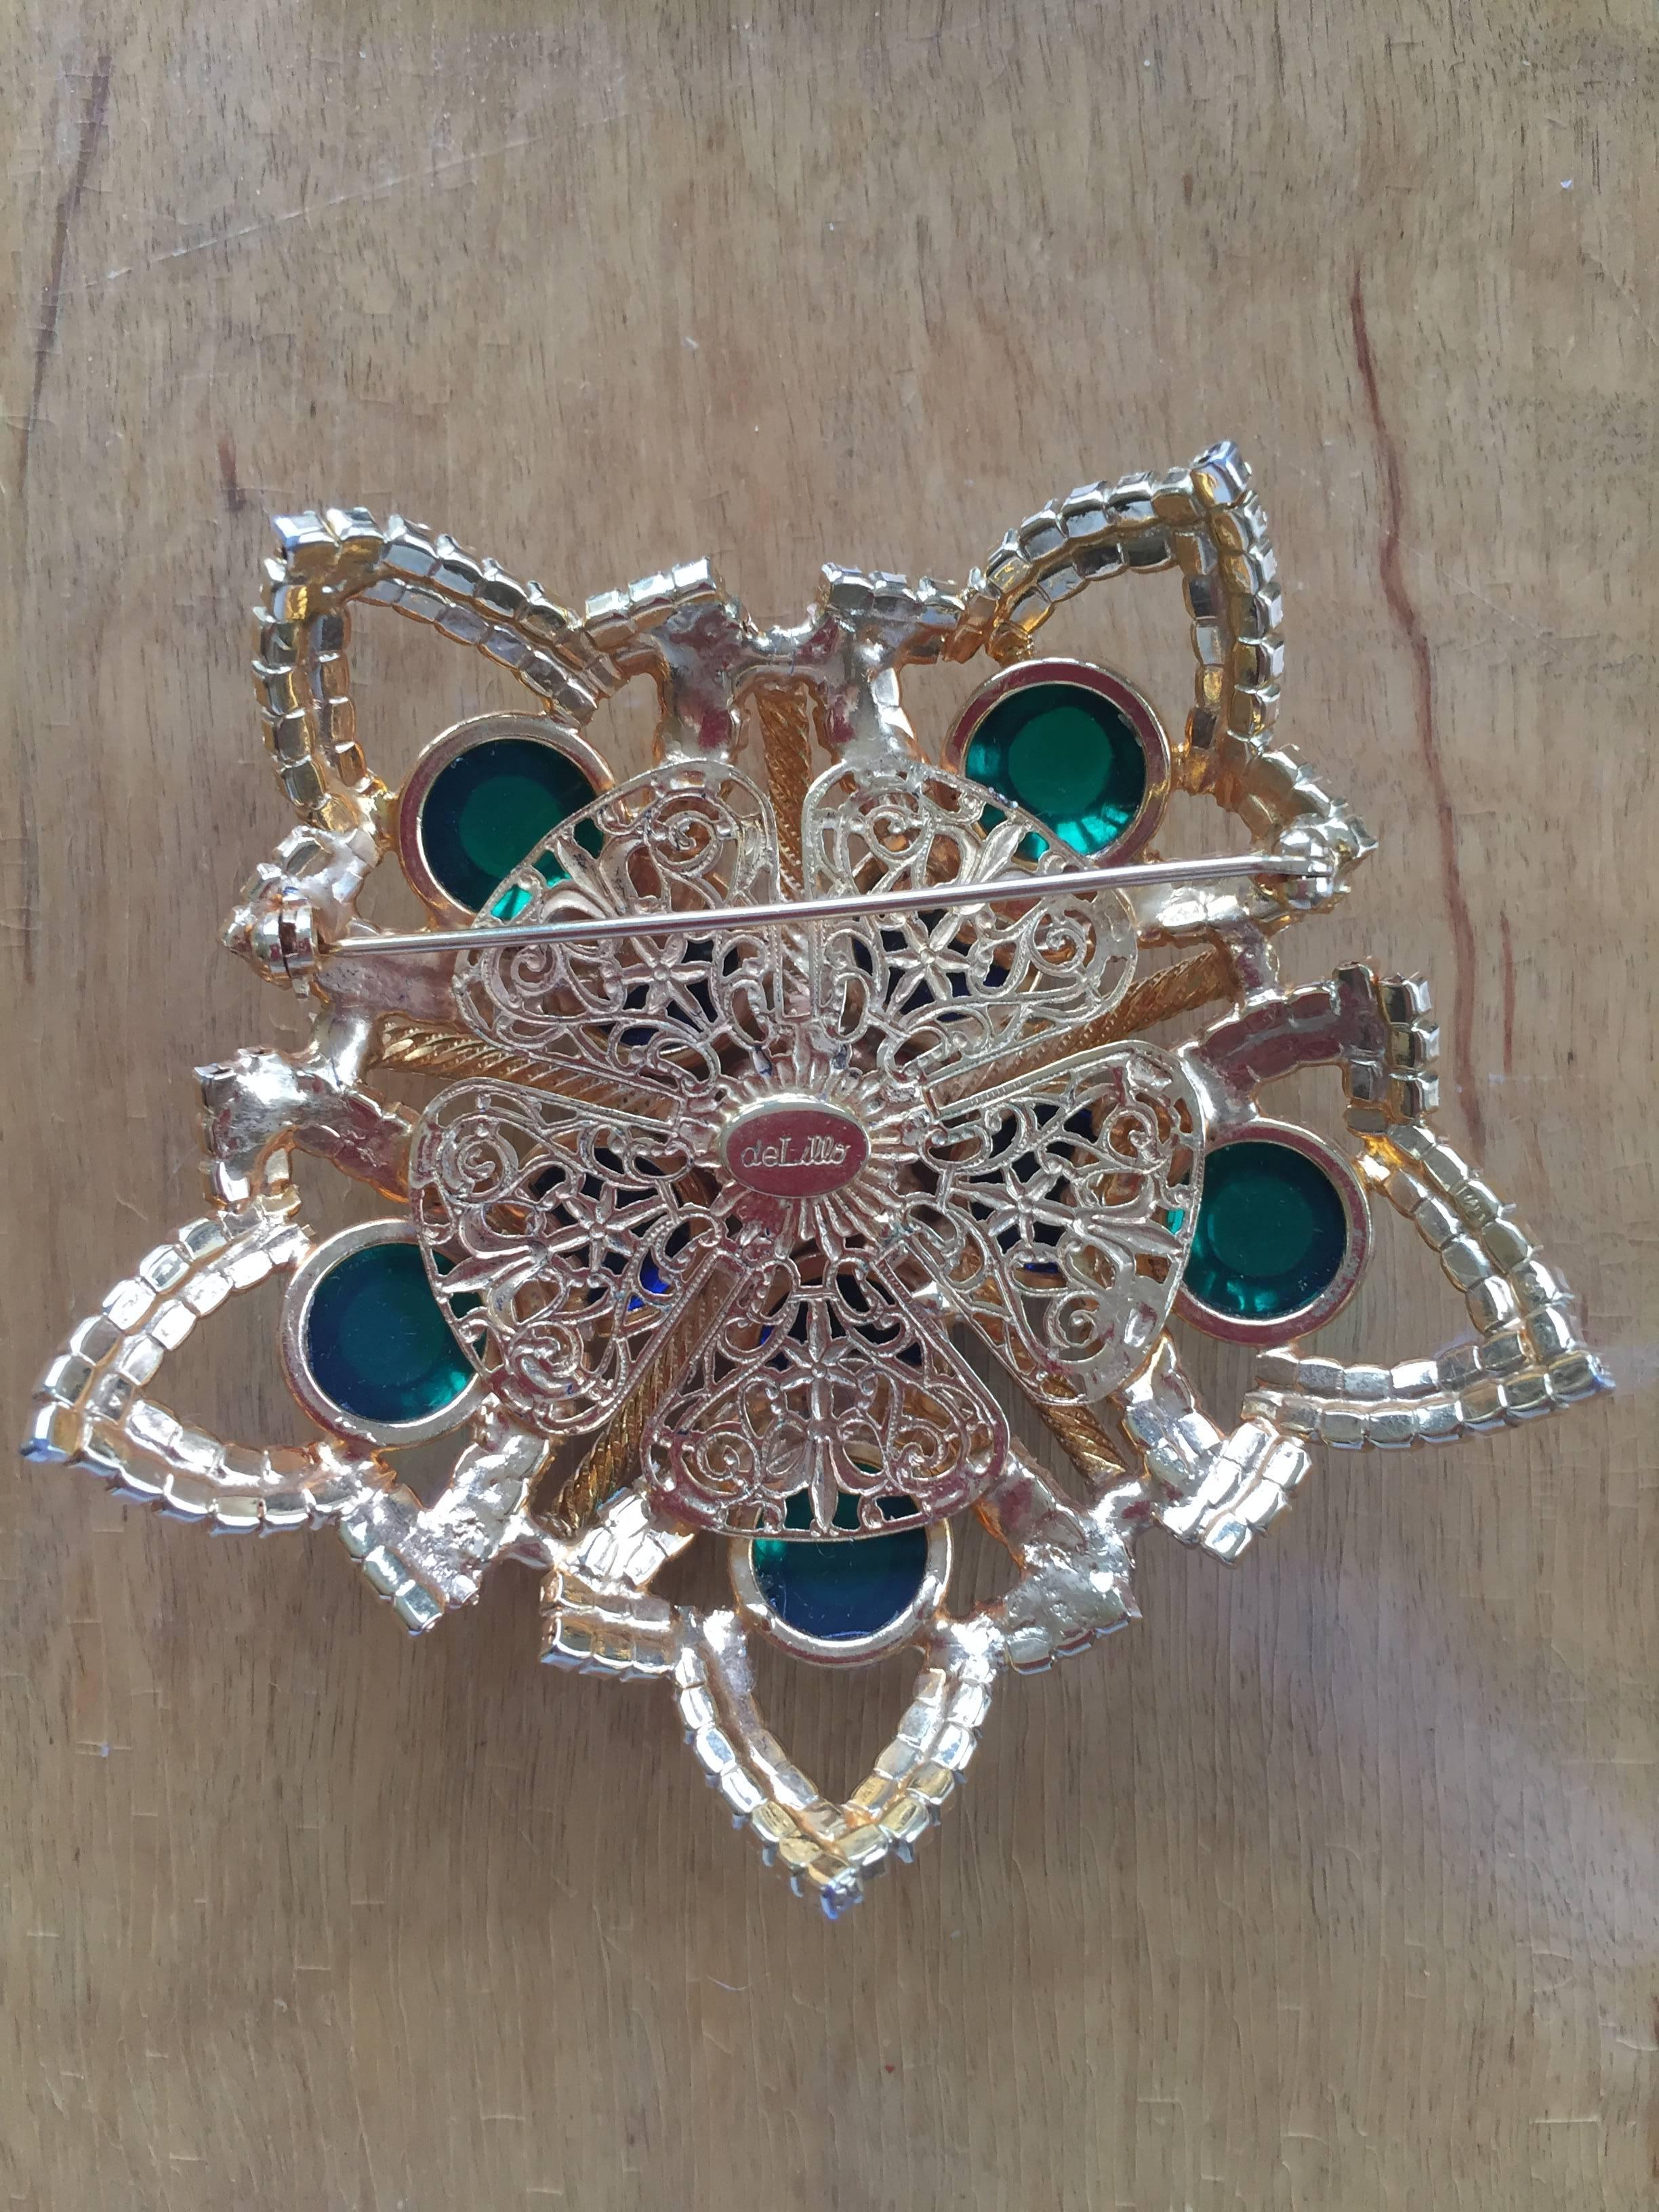 Wonderful jewel tone brooch by William De Llillo measuring just under 4" across.

William De Lillo was a jeweler with a background in fine jewelry who designed for Miriam Haskell for many years before designing under his own name. He designed